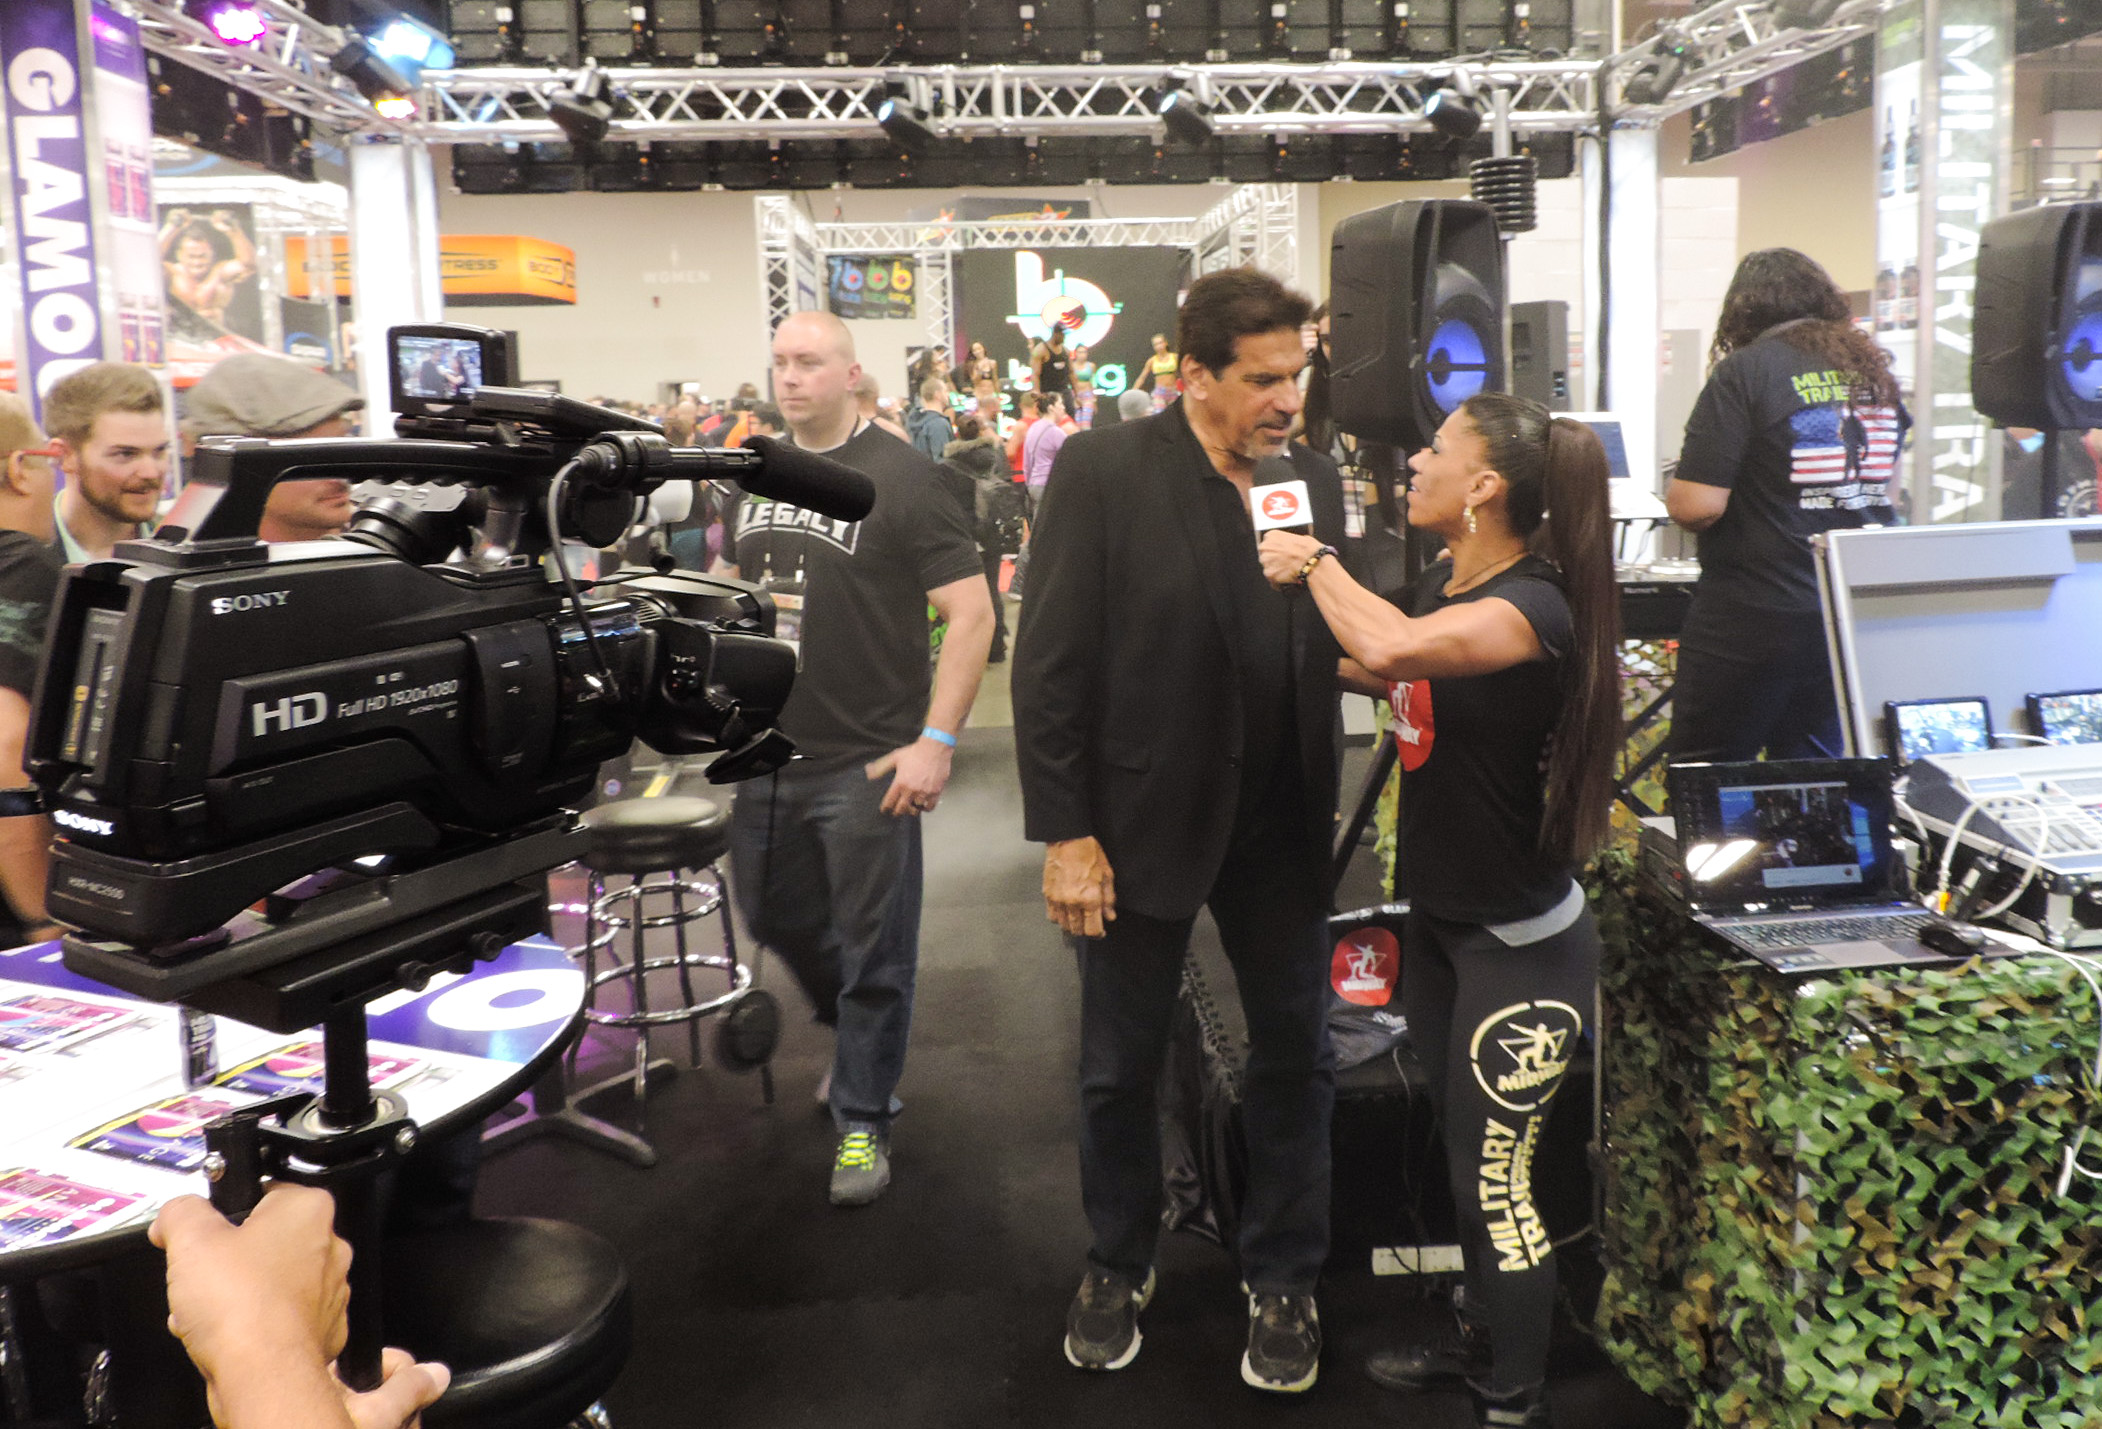 Lou Ferrigno being interviewed by Midway Labs team member.